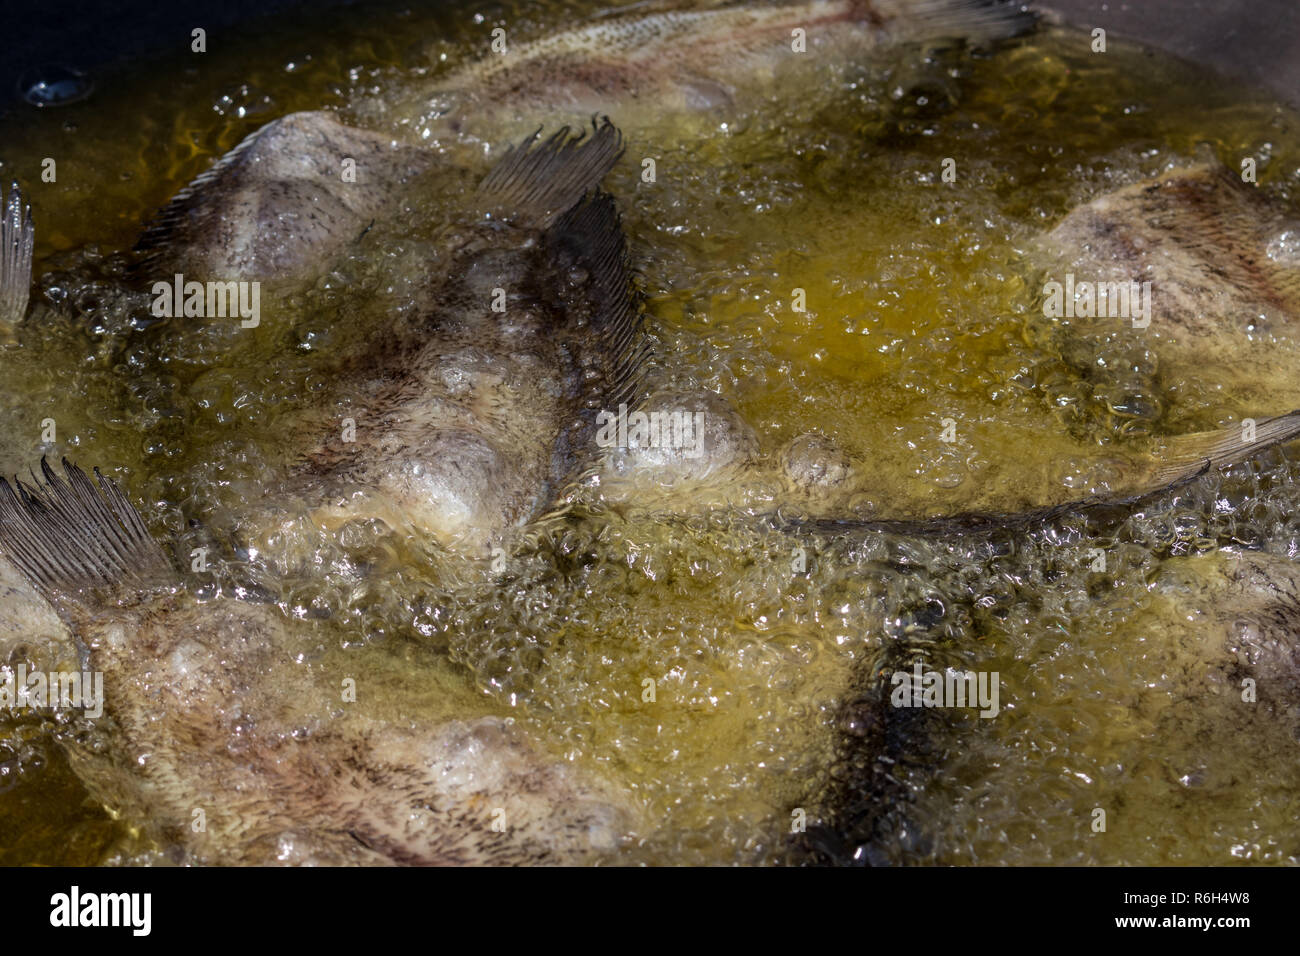 Fried Trichogaster pectoralis in large pan Stock Photo